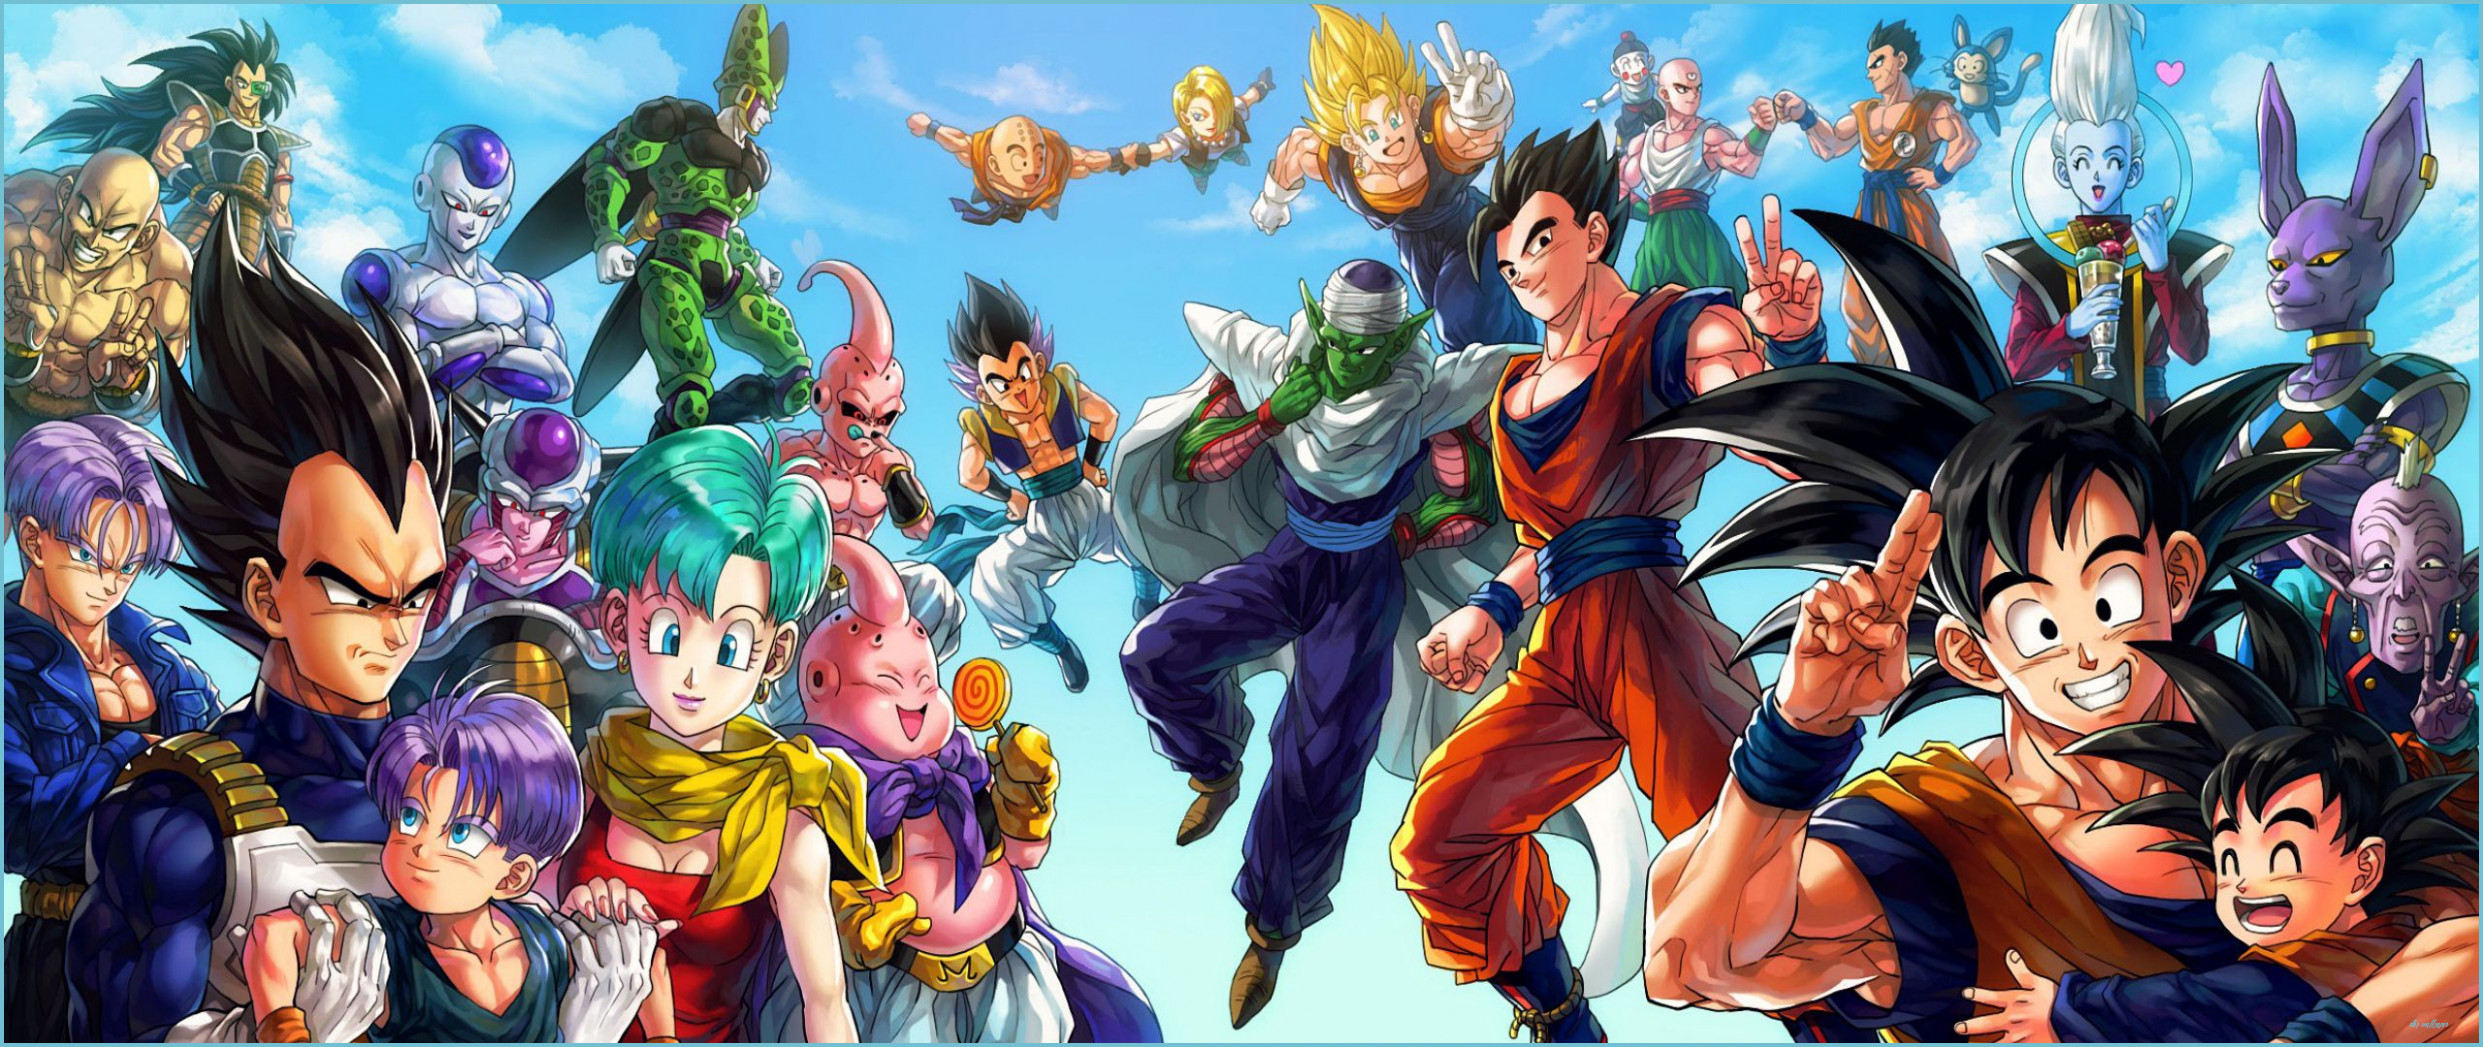 Reasons Why You Shouldn't Go To Dbz Wallpaper On Your